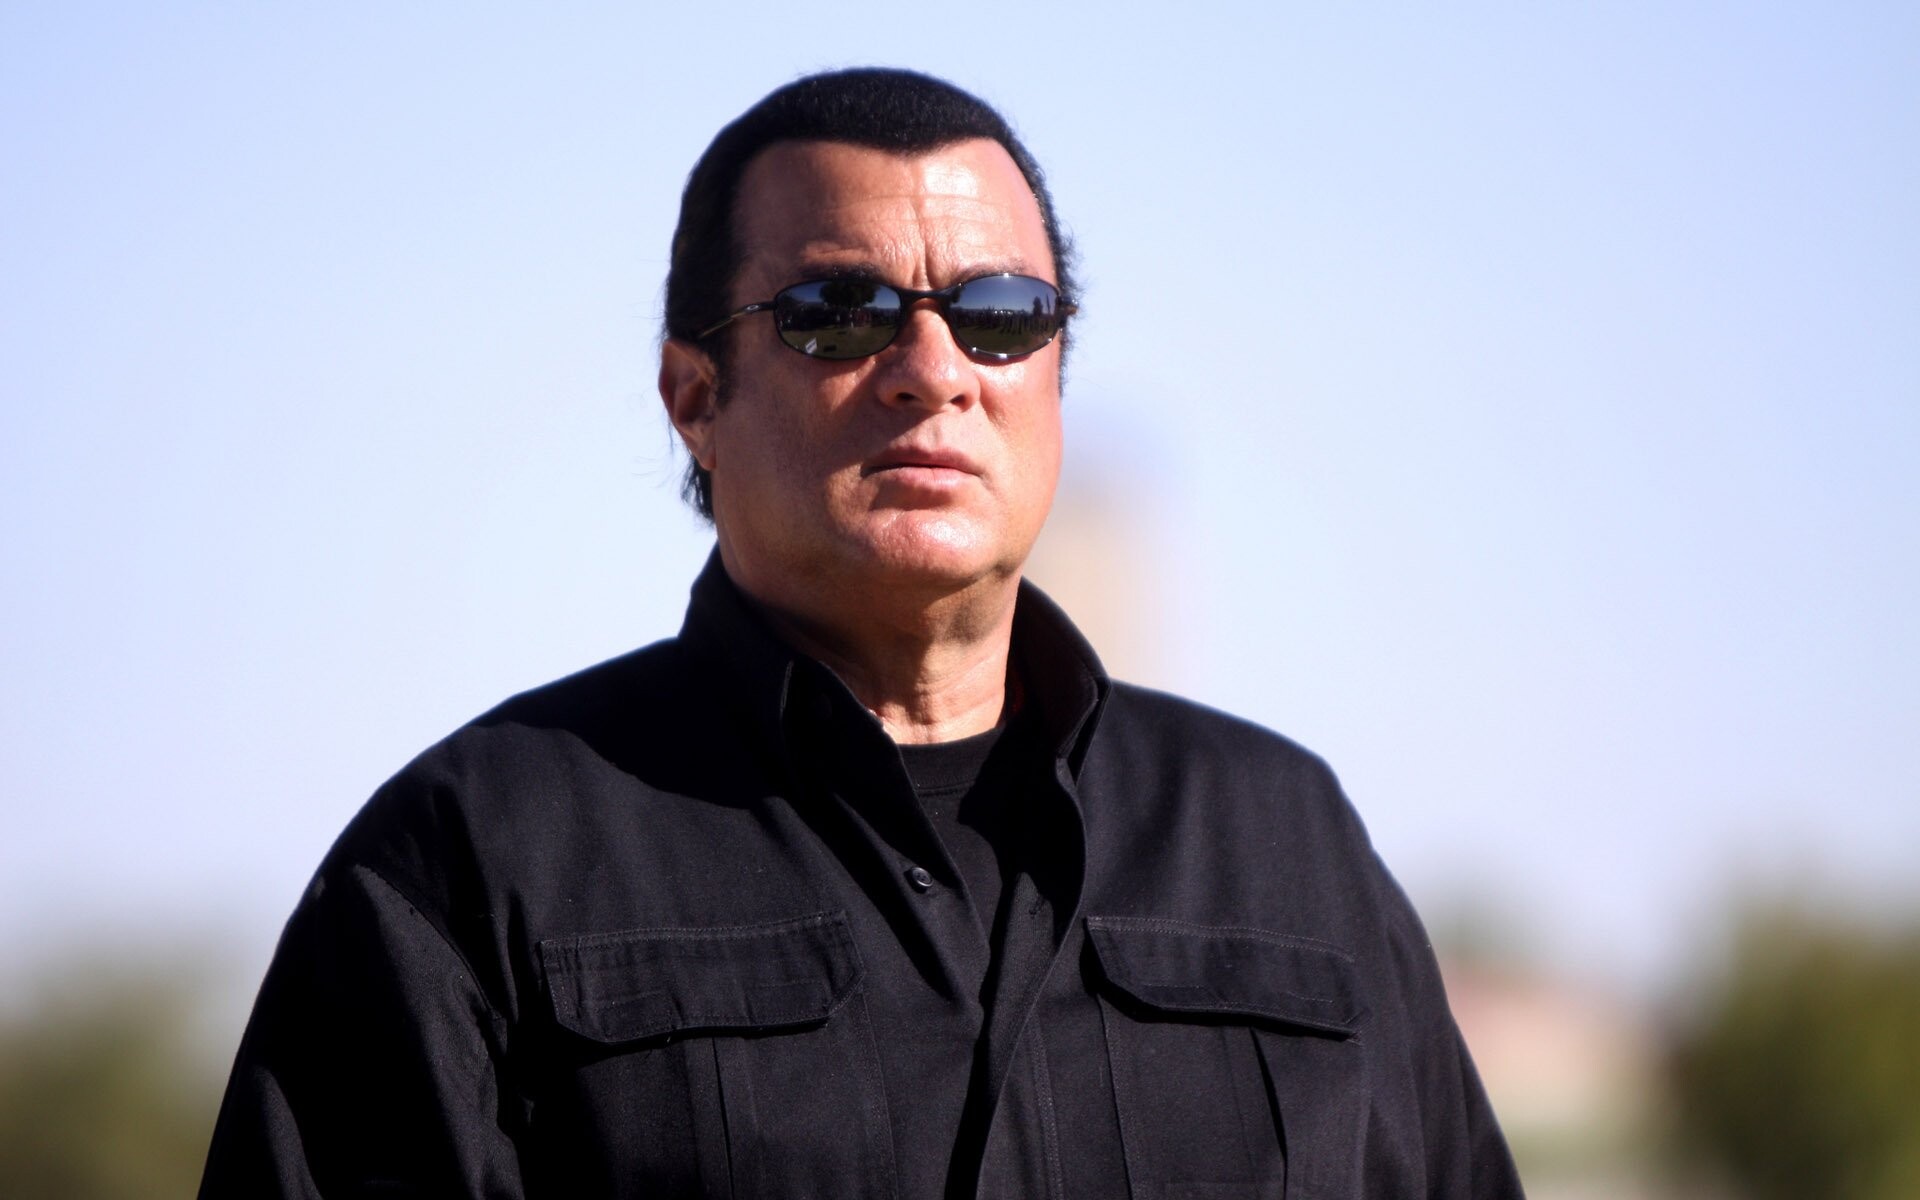 Steven Seagal: Nico Toscani in the 1988 action film Above the Law, Playing hard-bitten cops and commandos in action movies. 1920x1200 HD Background.